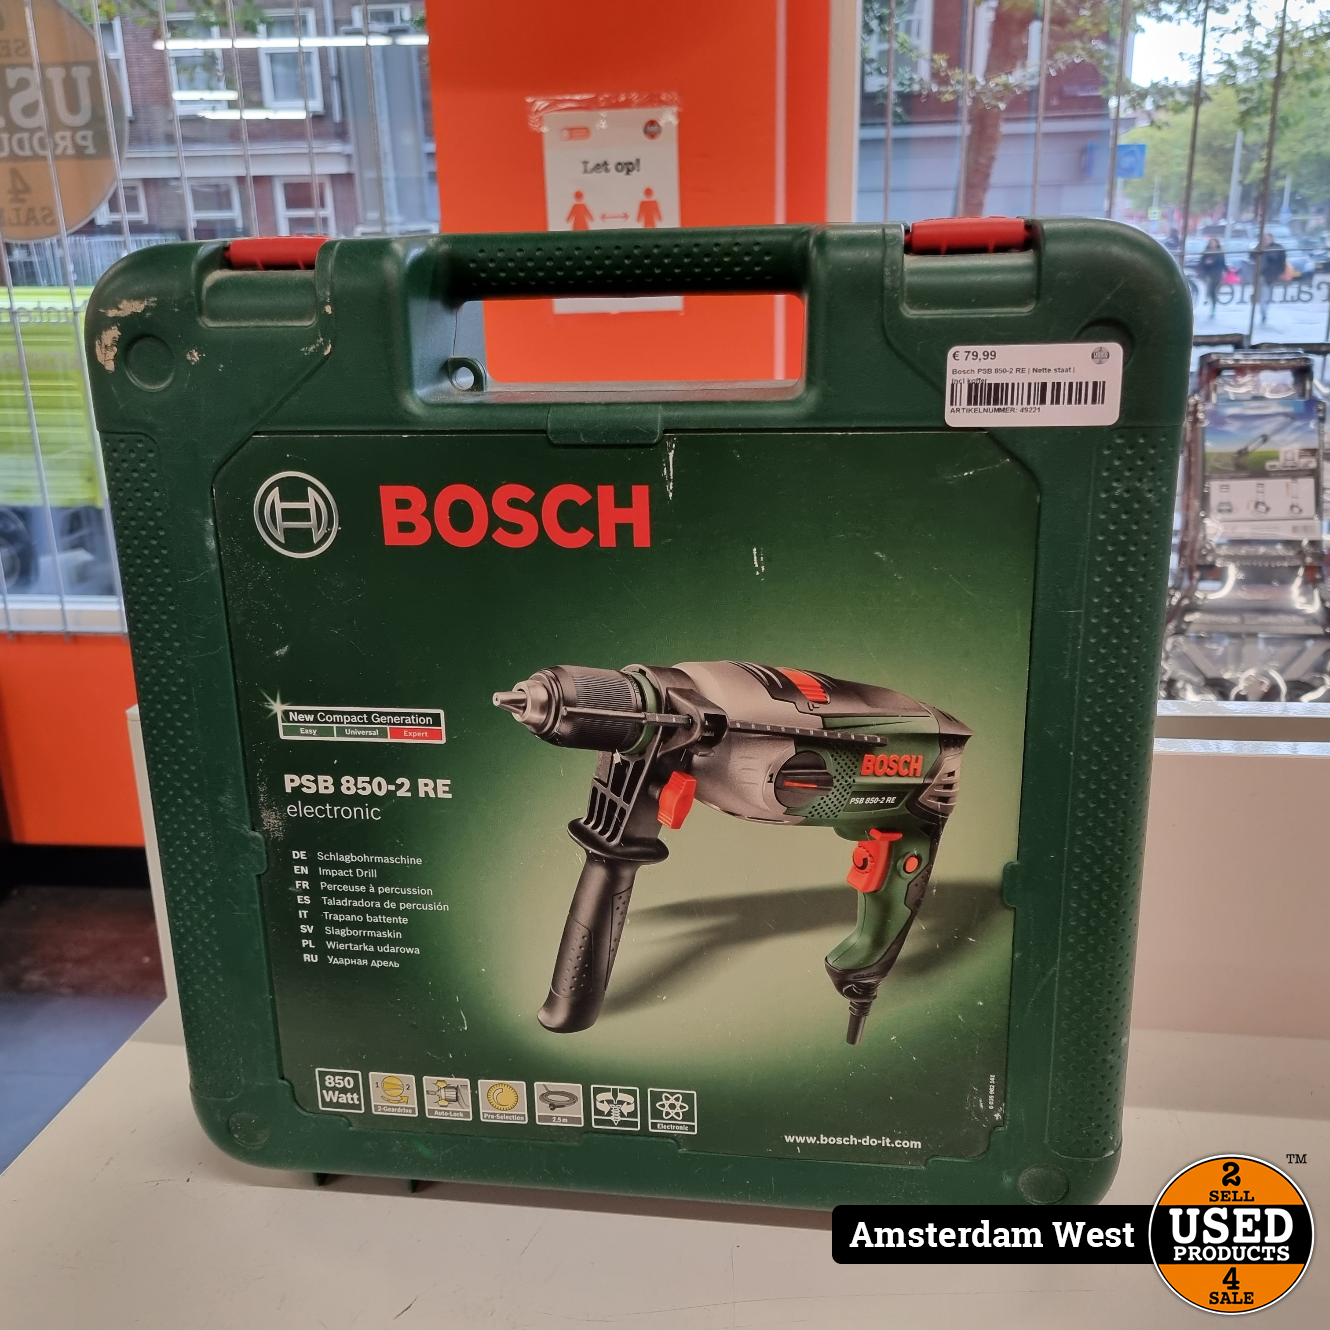 Bosch 850-2 RE | Nette staat | Incl koffer Used Products Amsterdam